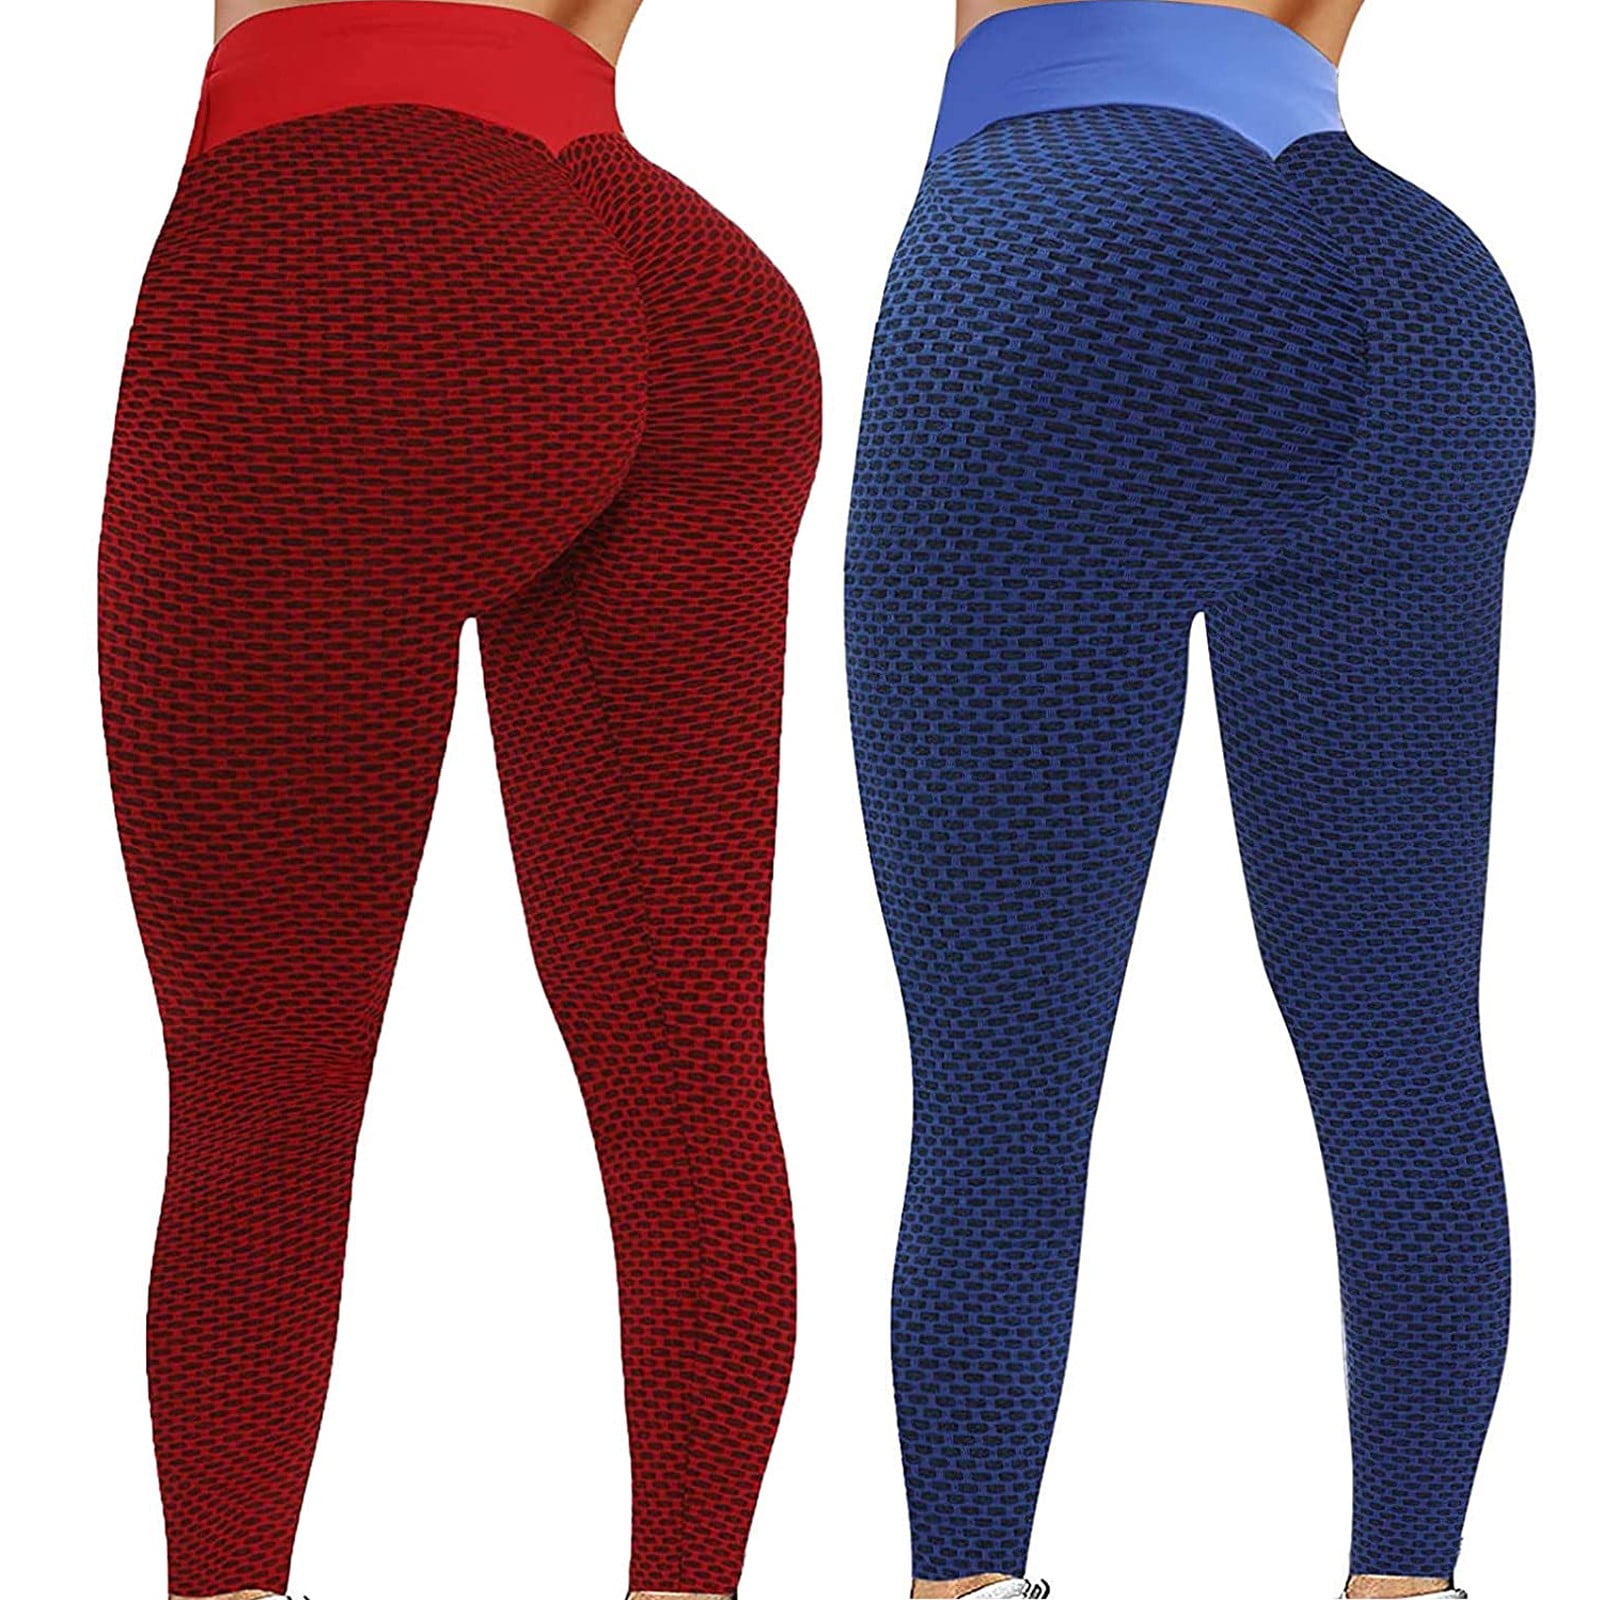 Details about   Women Fashion Fitness Athletic Running Yoga Gym Workout Legging Fast Free UK P+P 